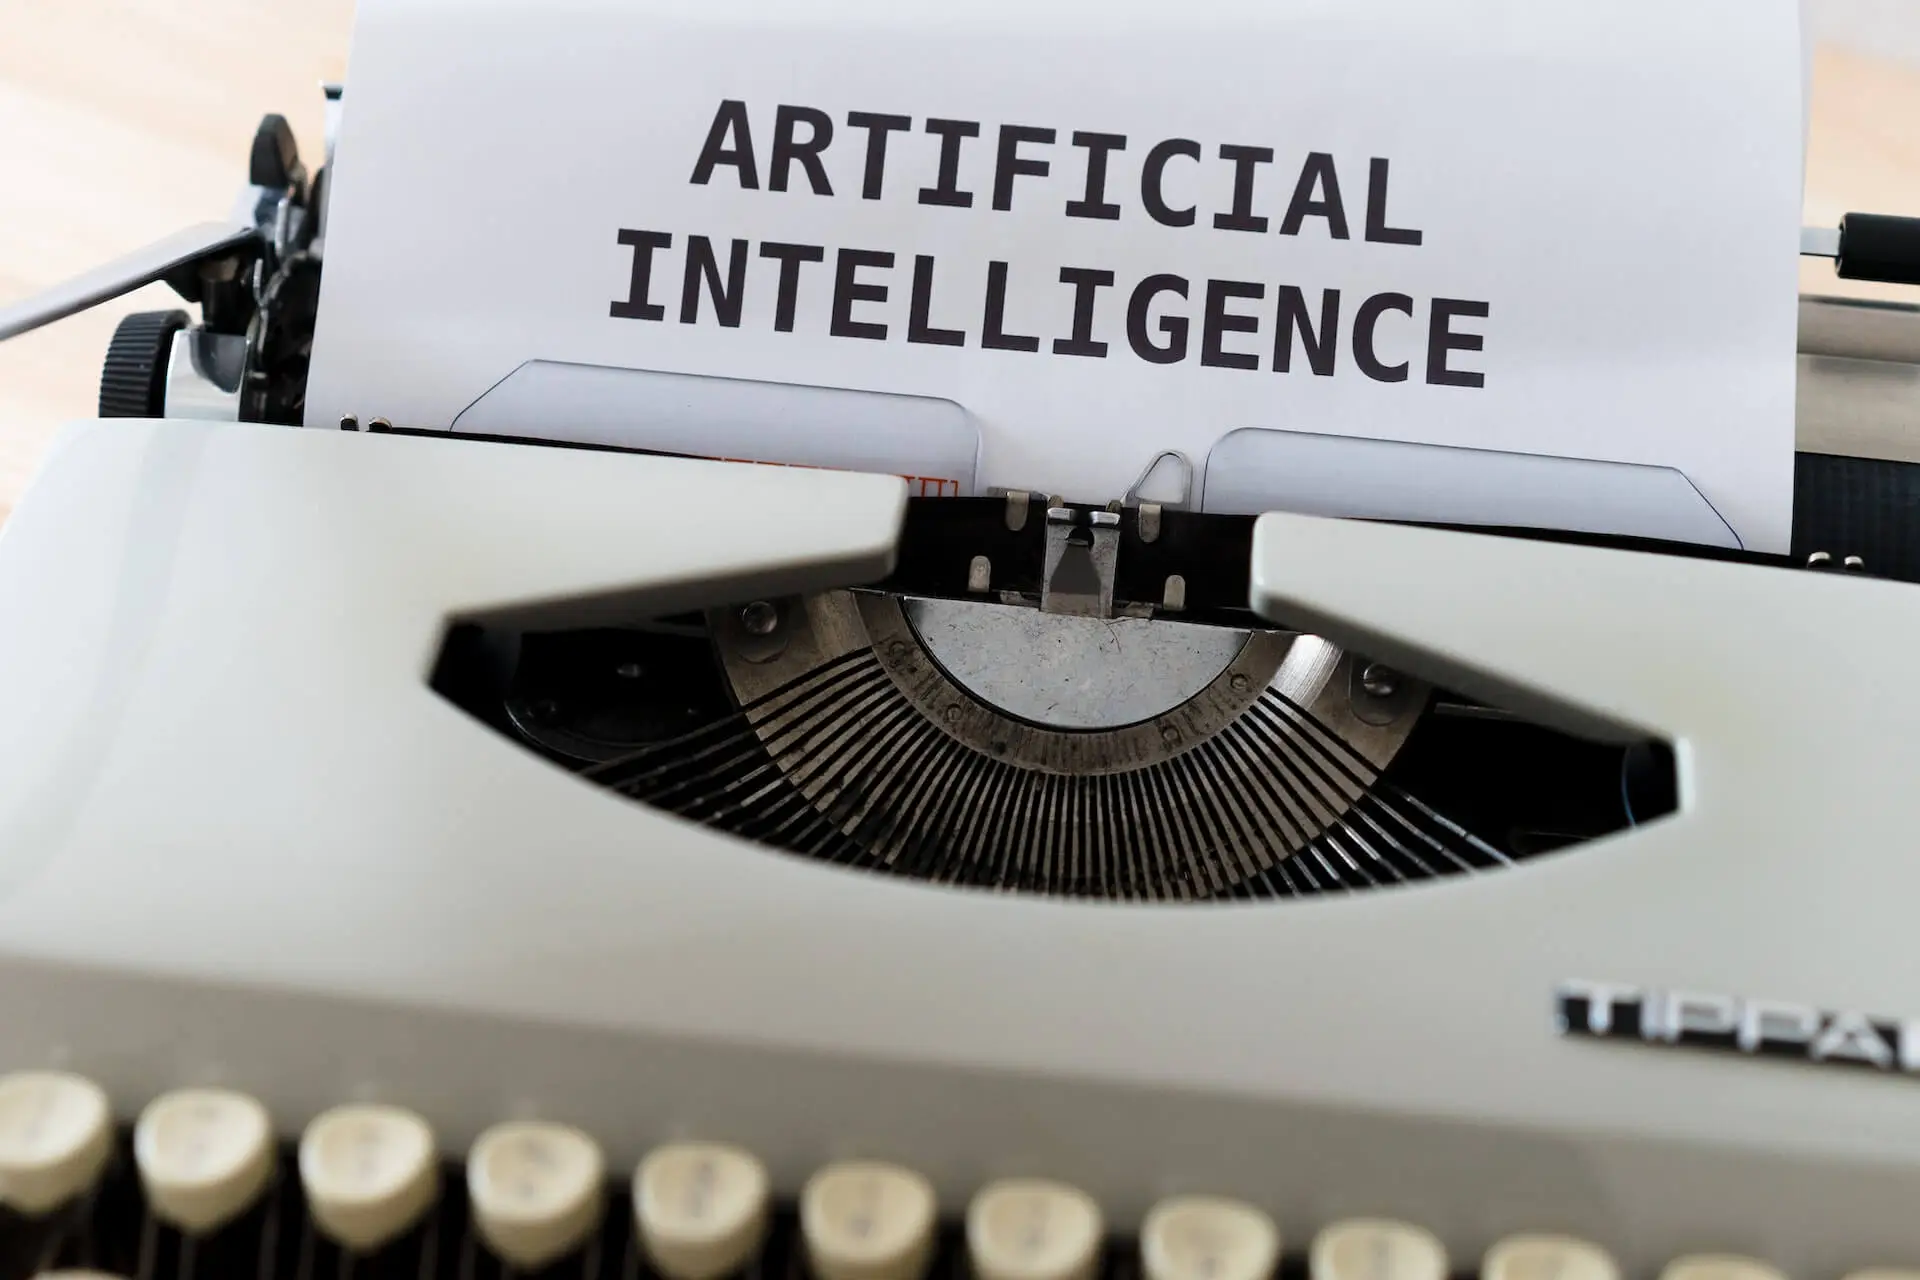 Content Generated by Artificial Intelligence Has Pros and Cons That Should be Considered By Businesses